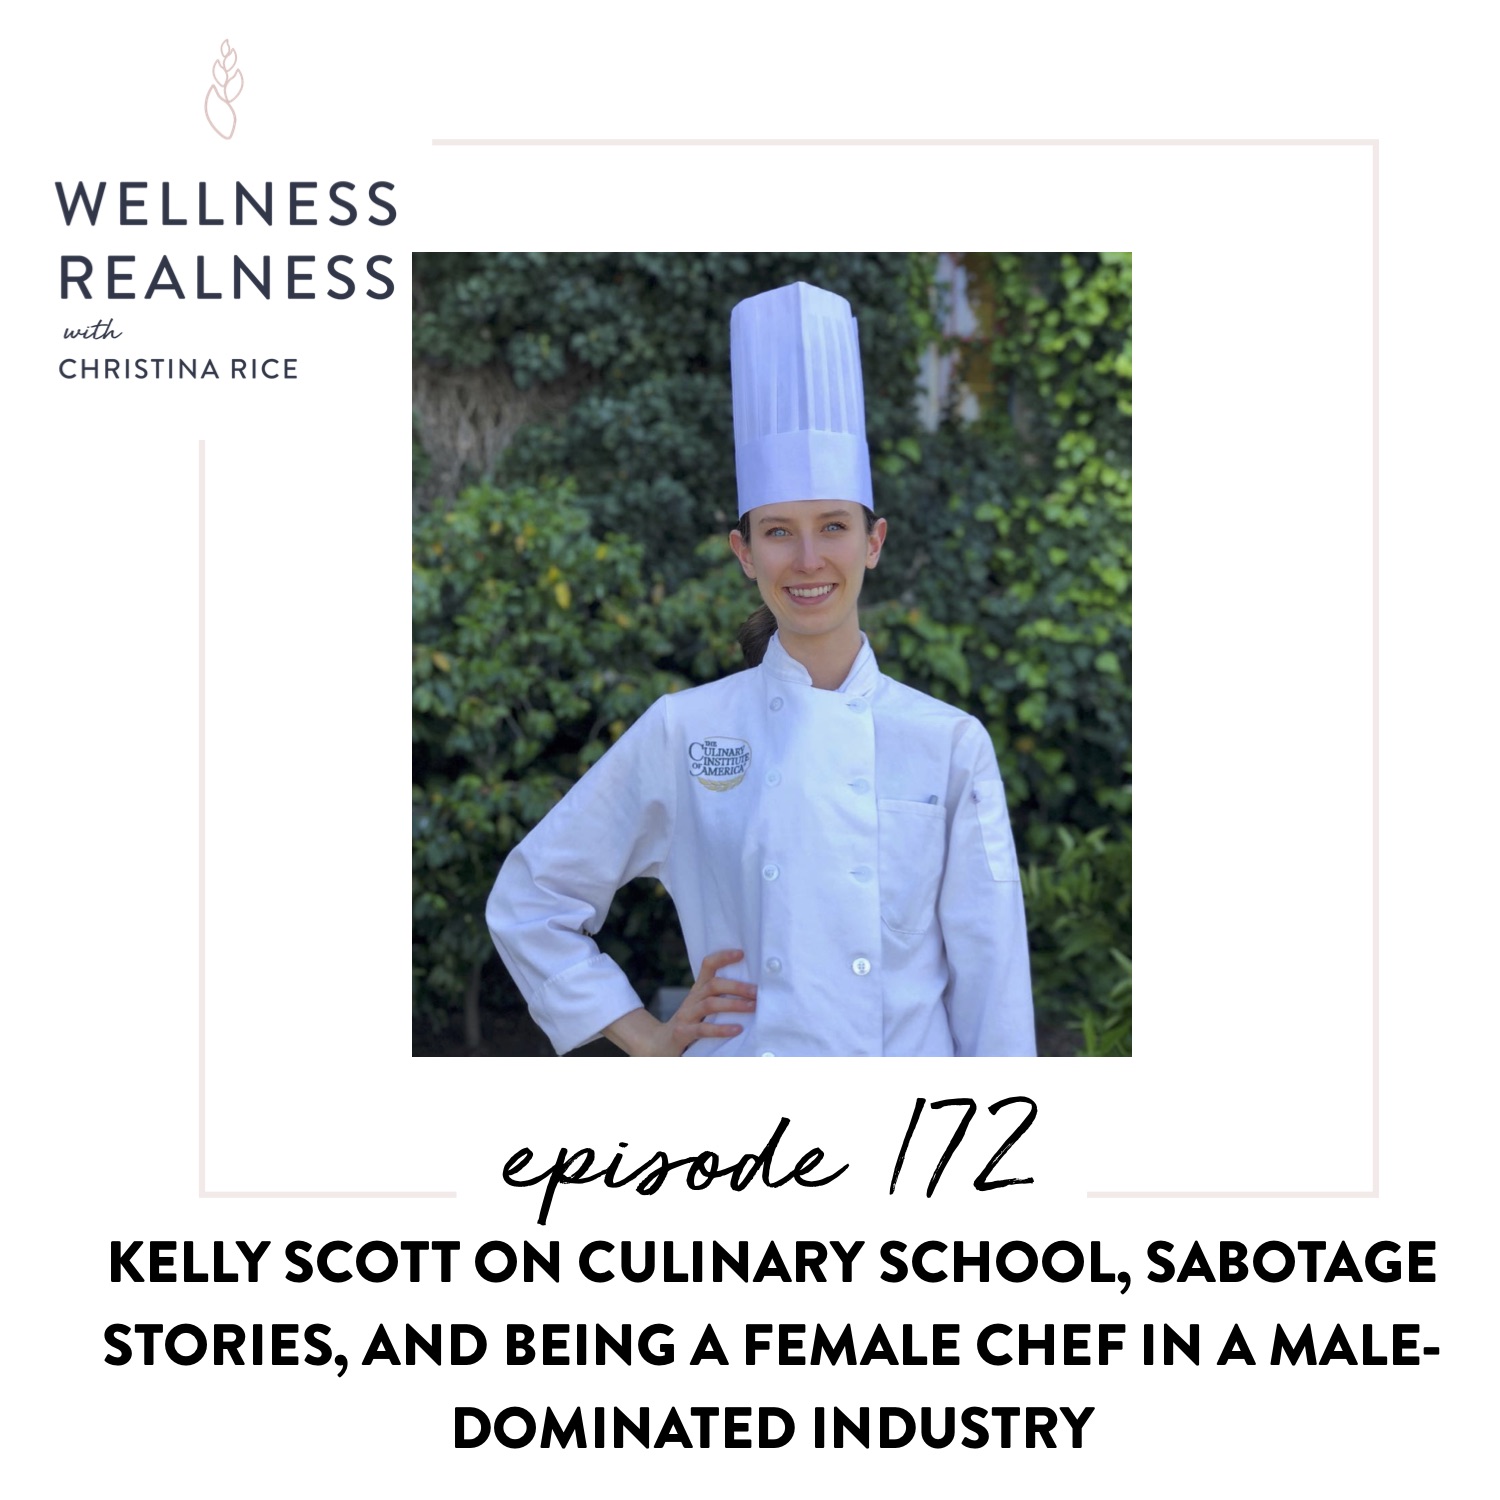 172: Kelly Scott on Culinary School, Sabotage Stories, and Being a Female Chef in a Male-Dominated Industry